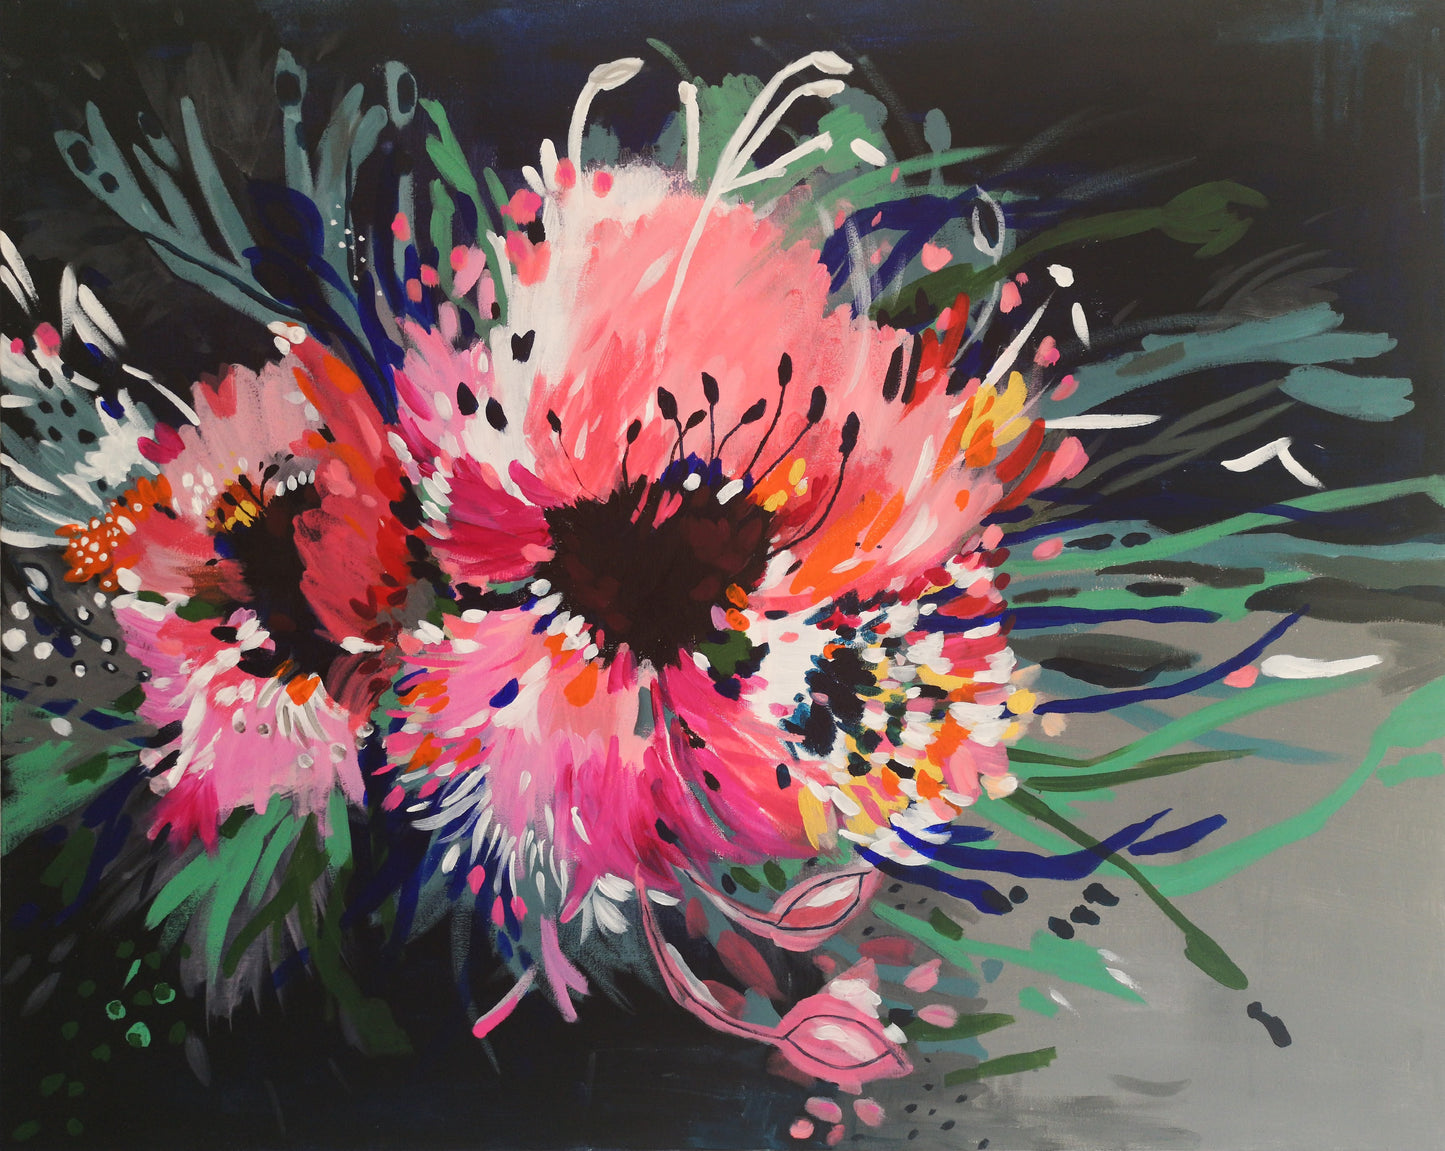 Art Print of Abstract Flower Painting featuring two large bold pink blooms bursting on the page, with contrasting lines of blue, green and white extending out to add movement. Vibrant, bold and colourful original painting by Judy Century.